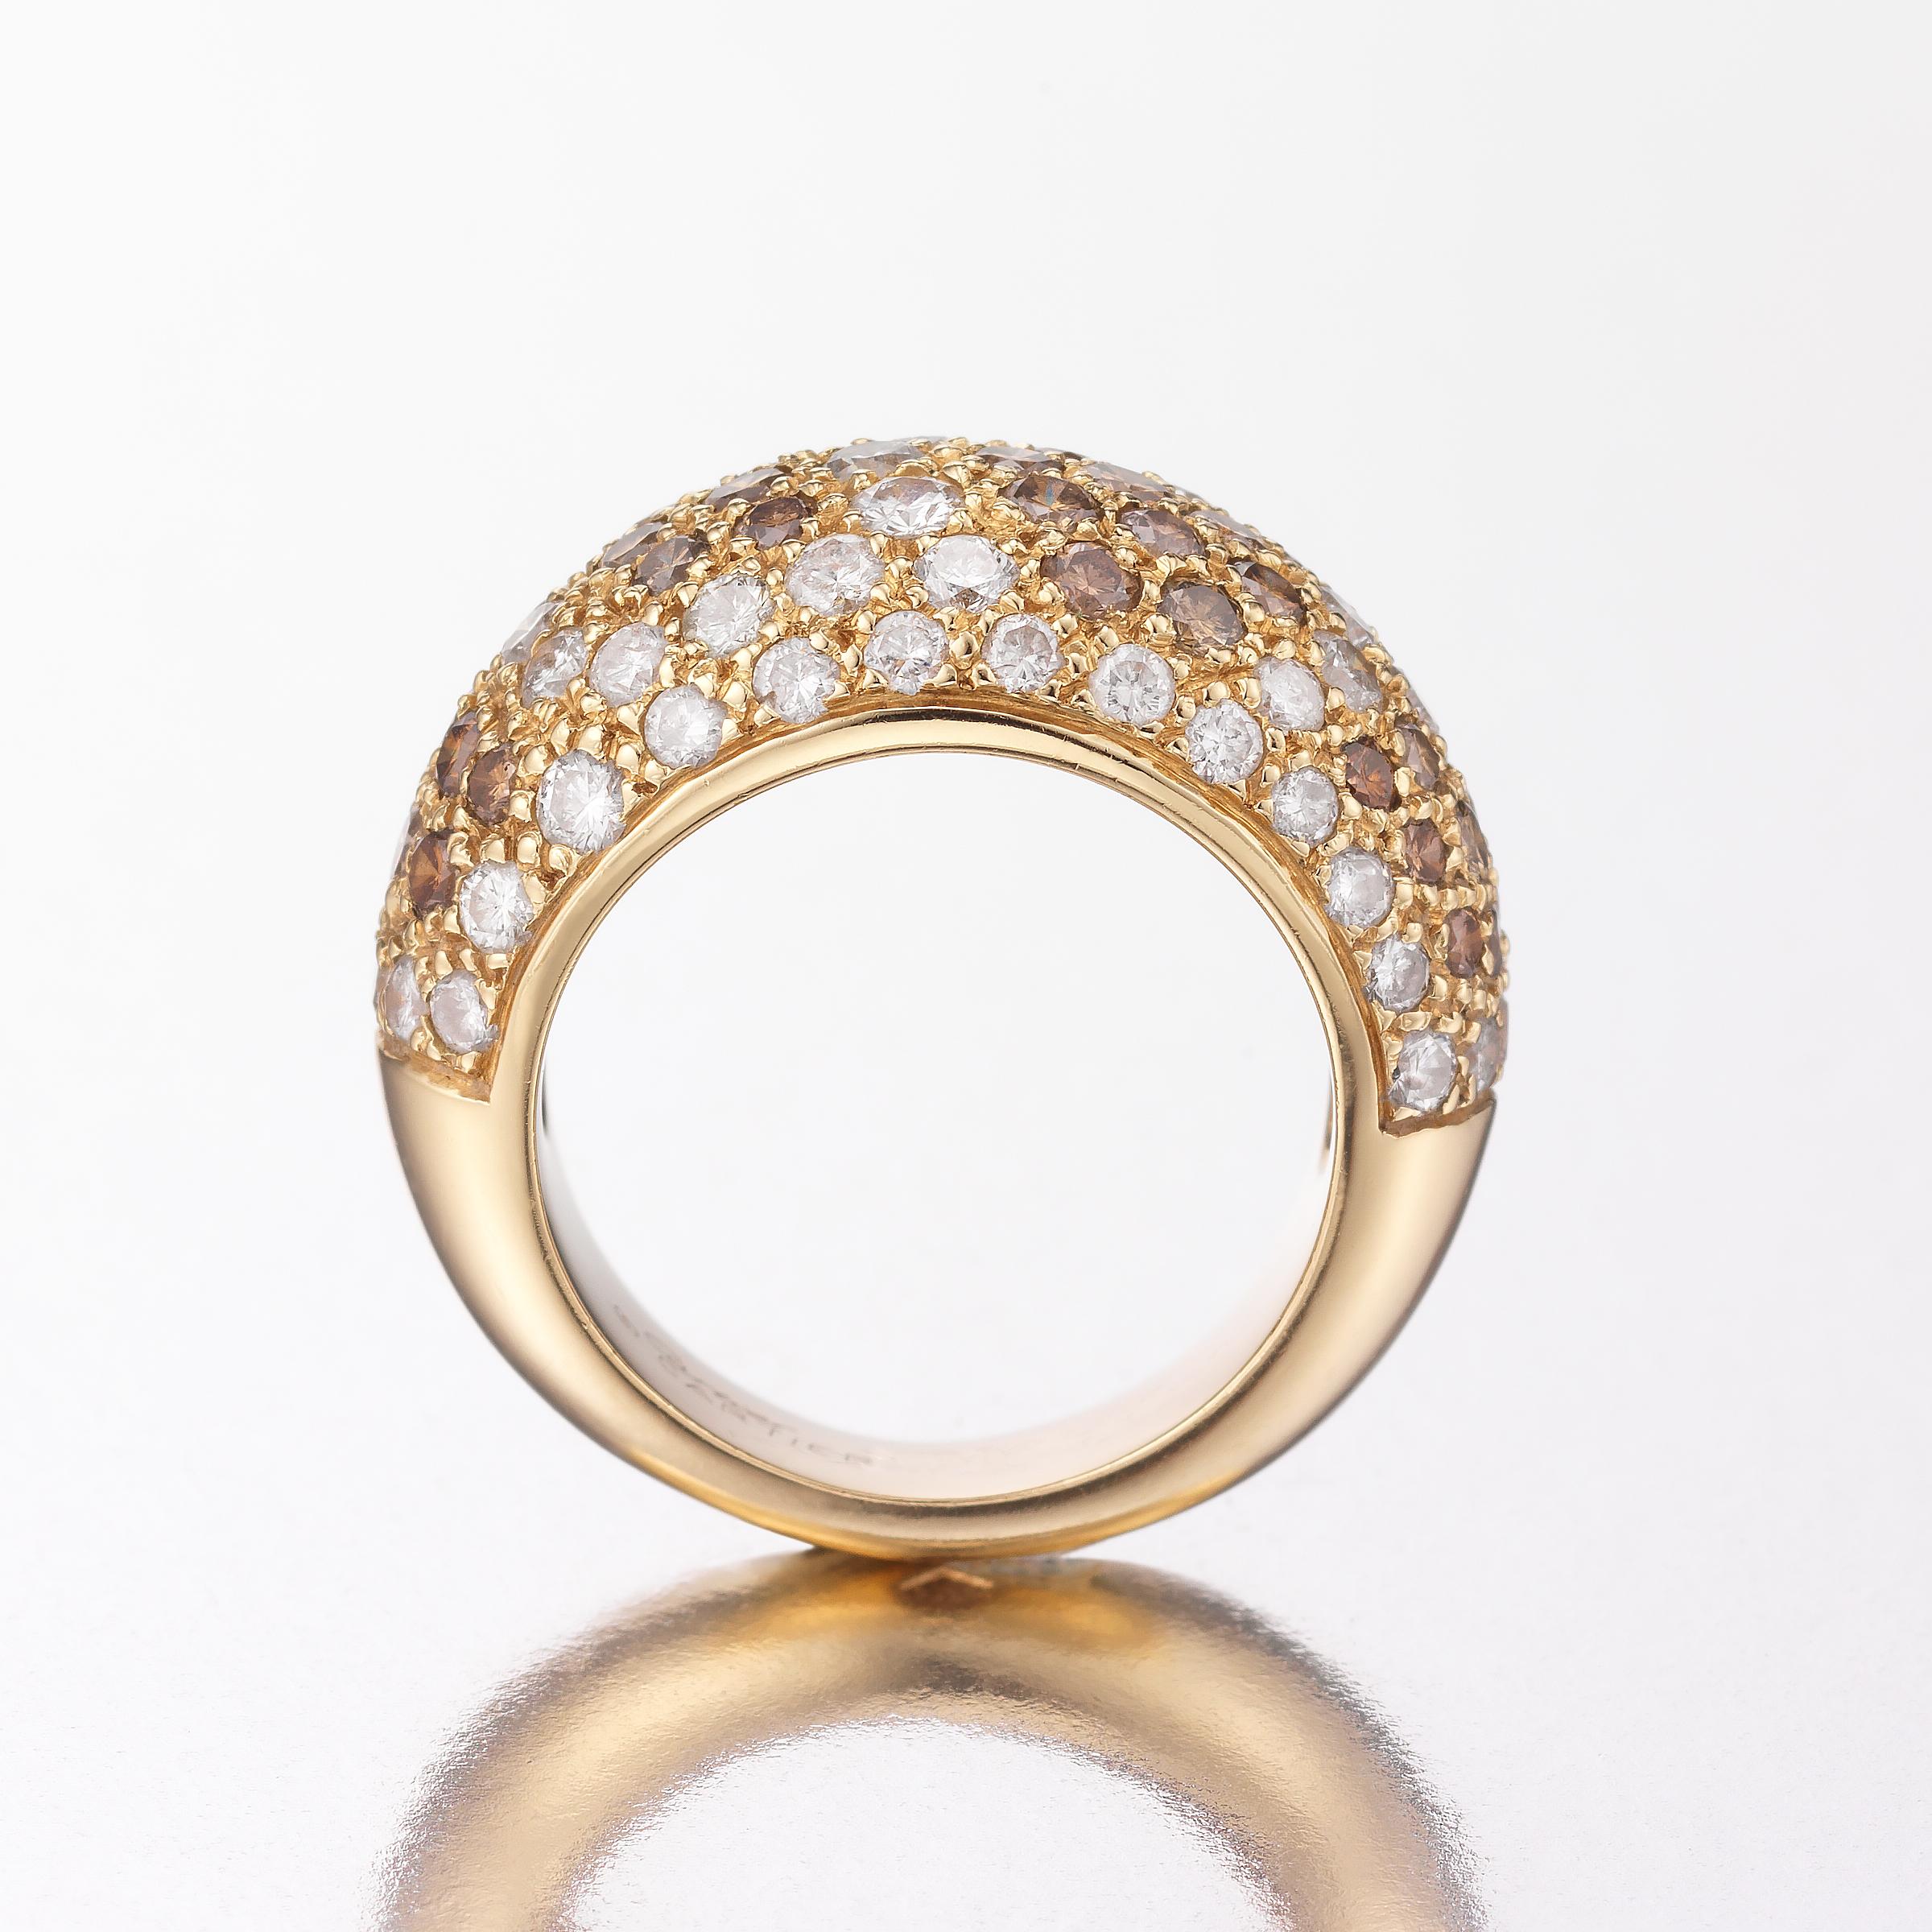 A glittering Cartier bombe ring showcasing approximately 3.5 carats of white and cognac - brown colored diamonds, all pave-set in 18 karat yellow gold. The ring is masterfully crafted by Cartier and its gracefully curving bombe shape allows added